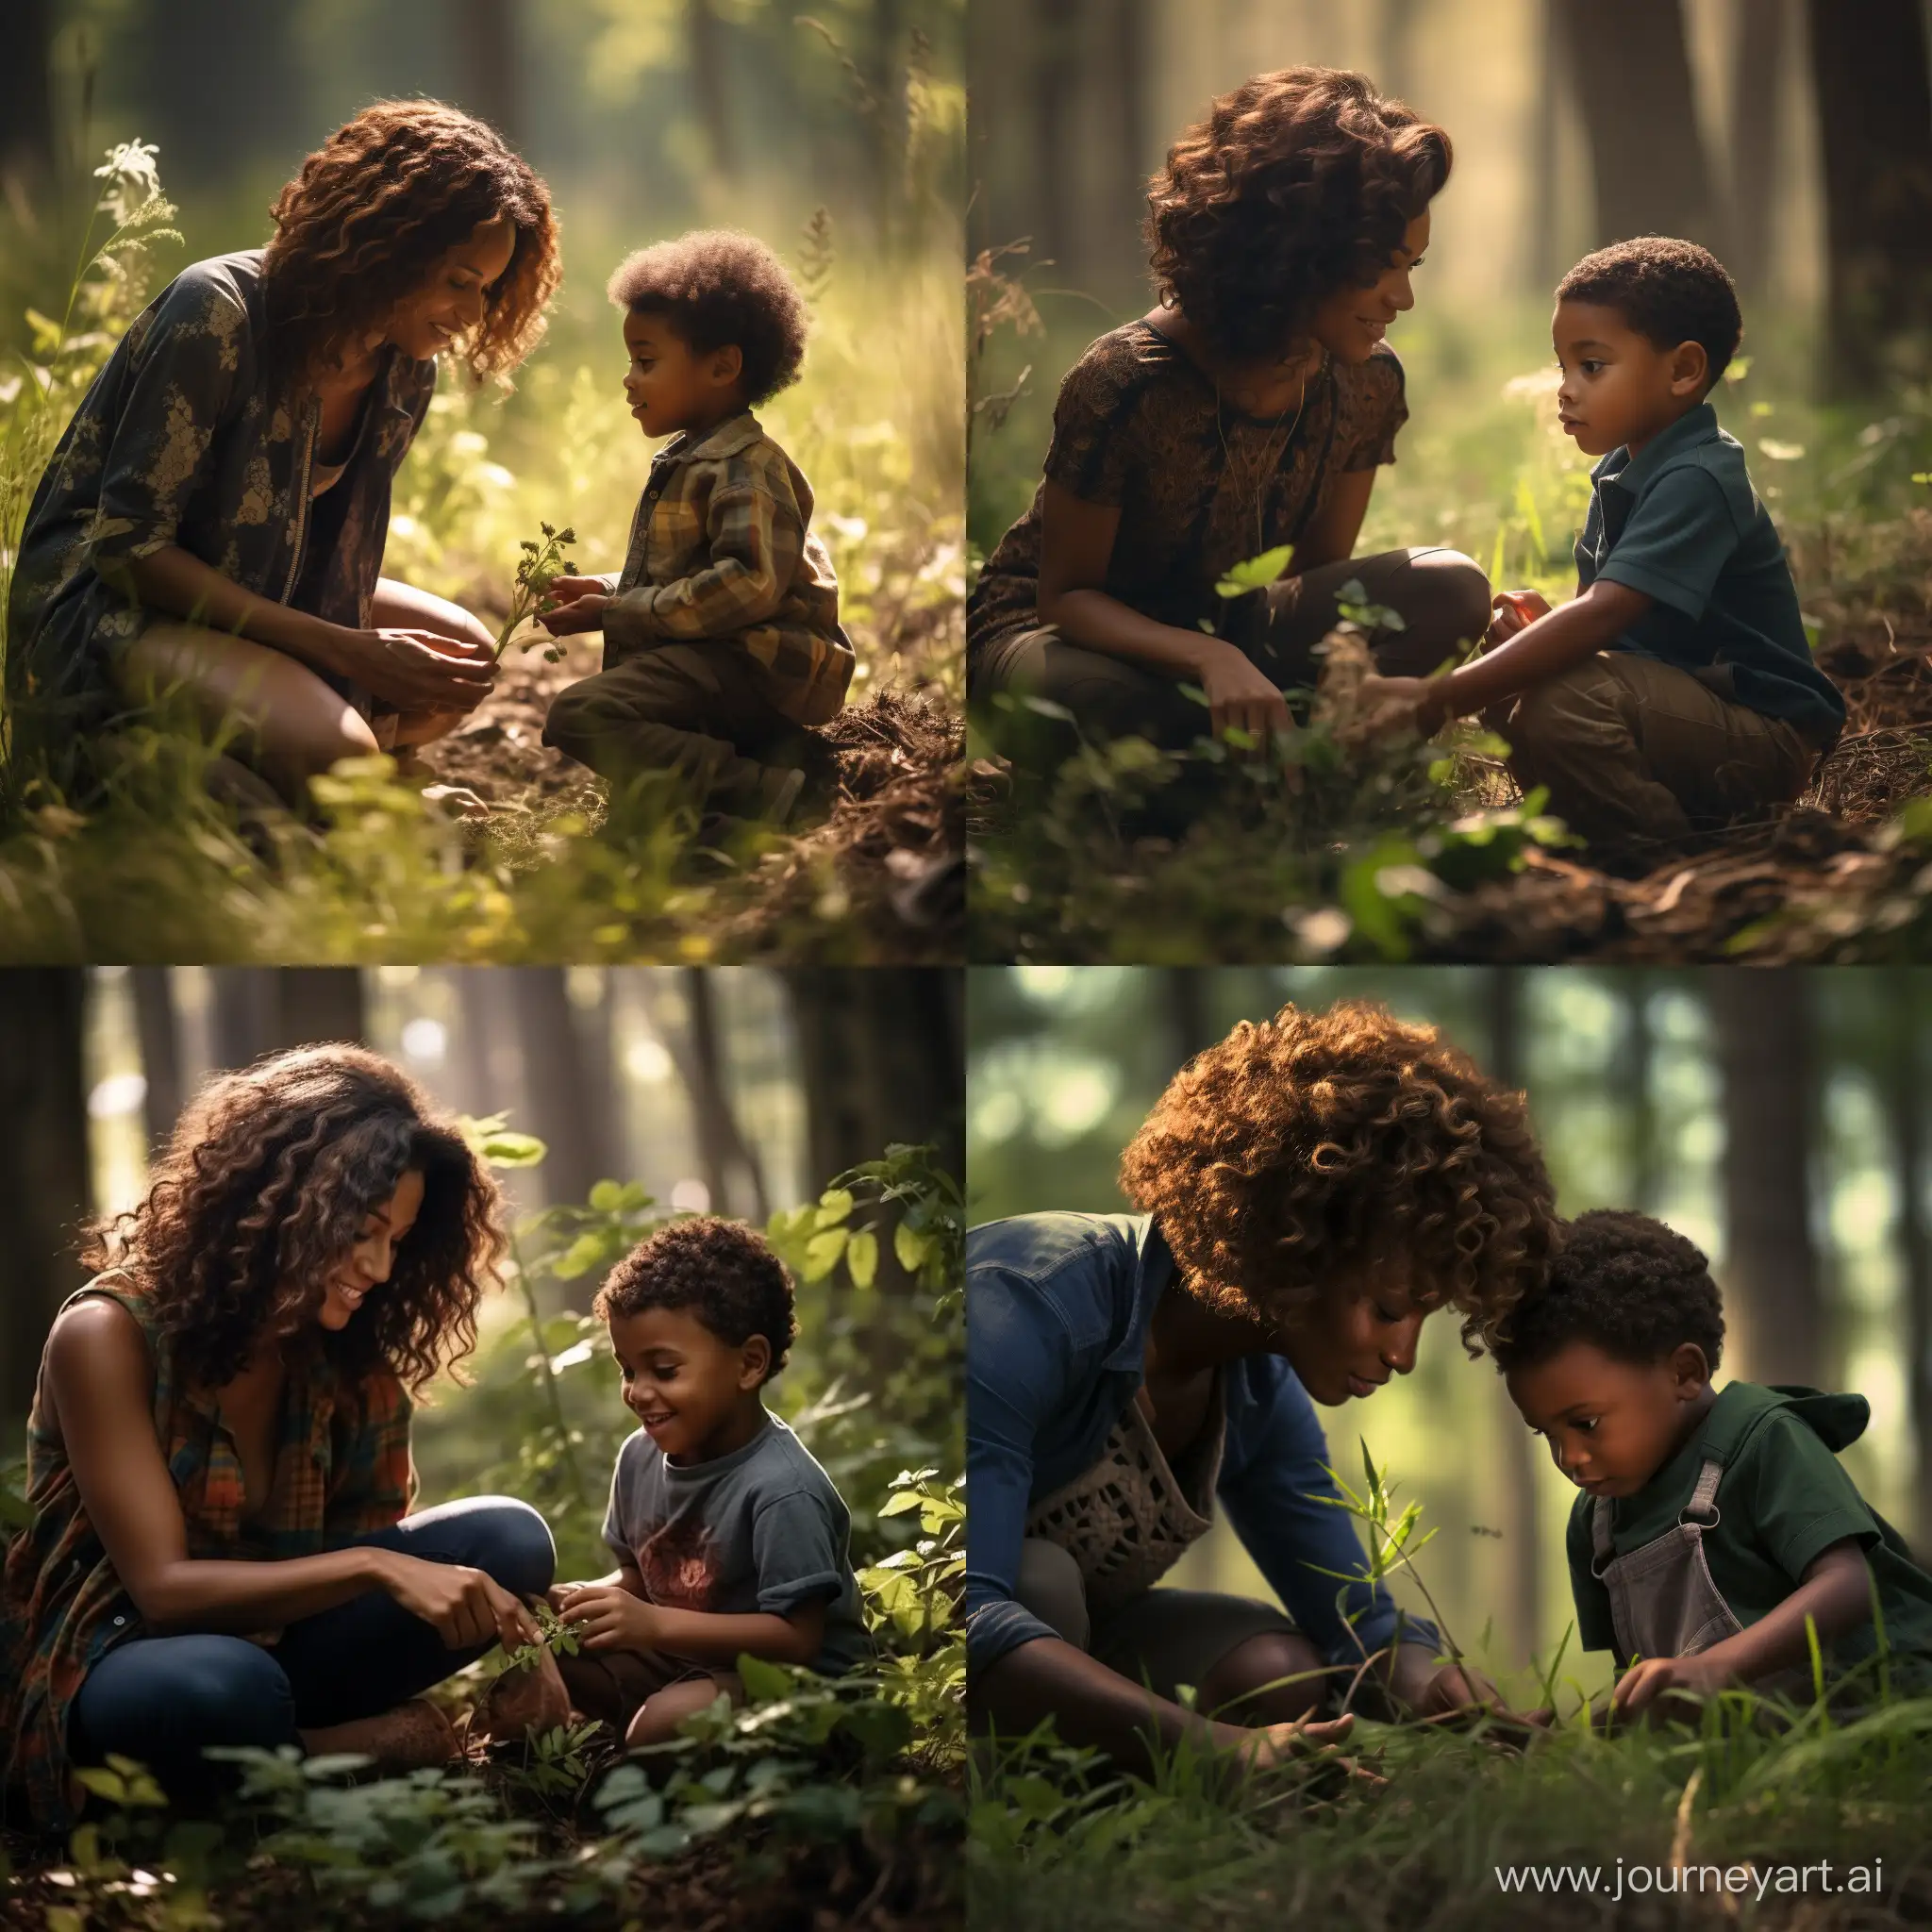 Black-Mother-and-Son-Enjoying-Nature-in-Sunlit-Forest